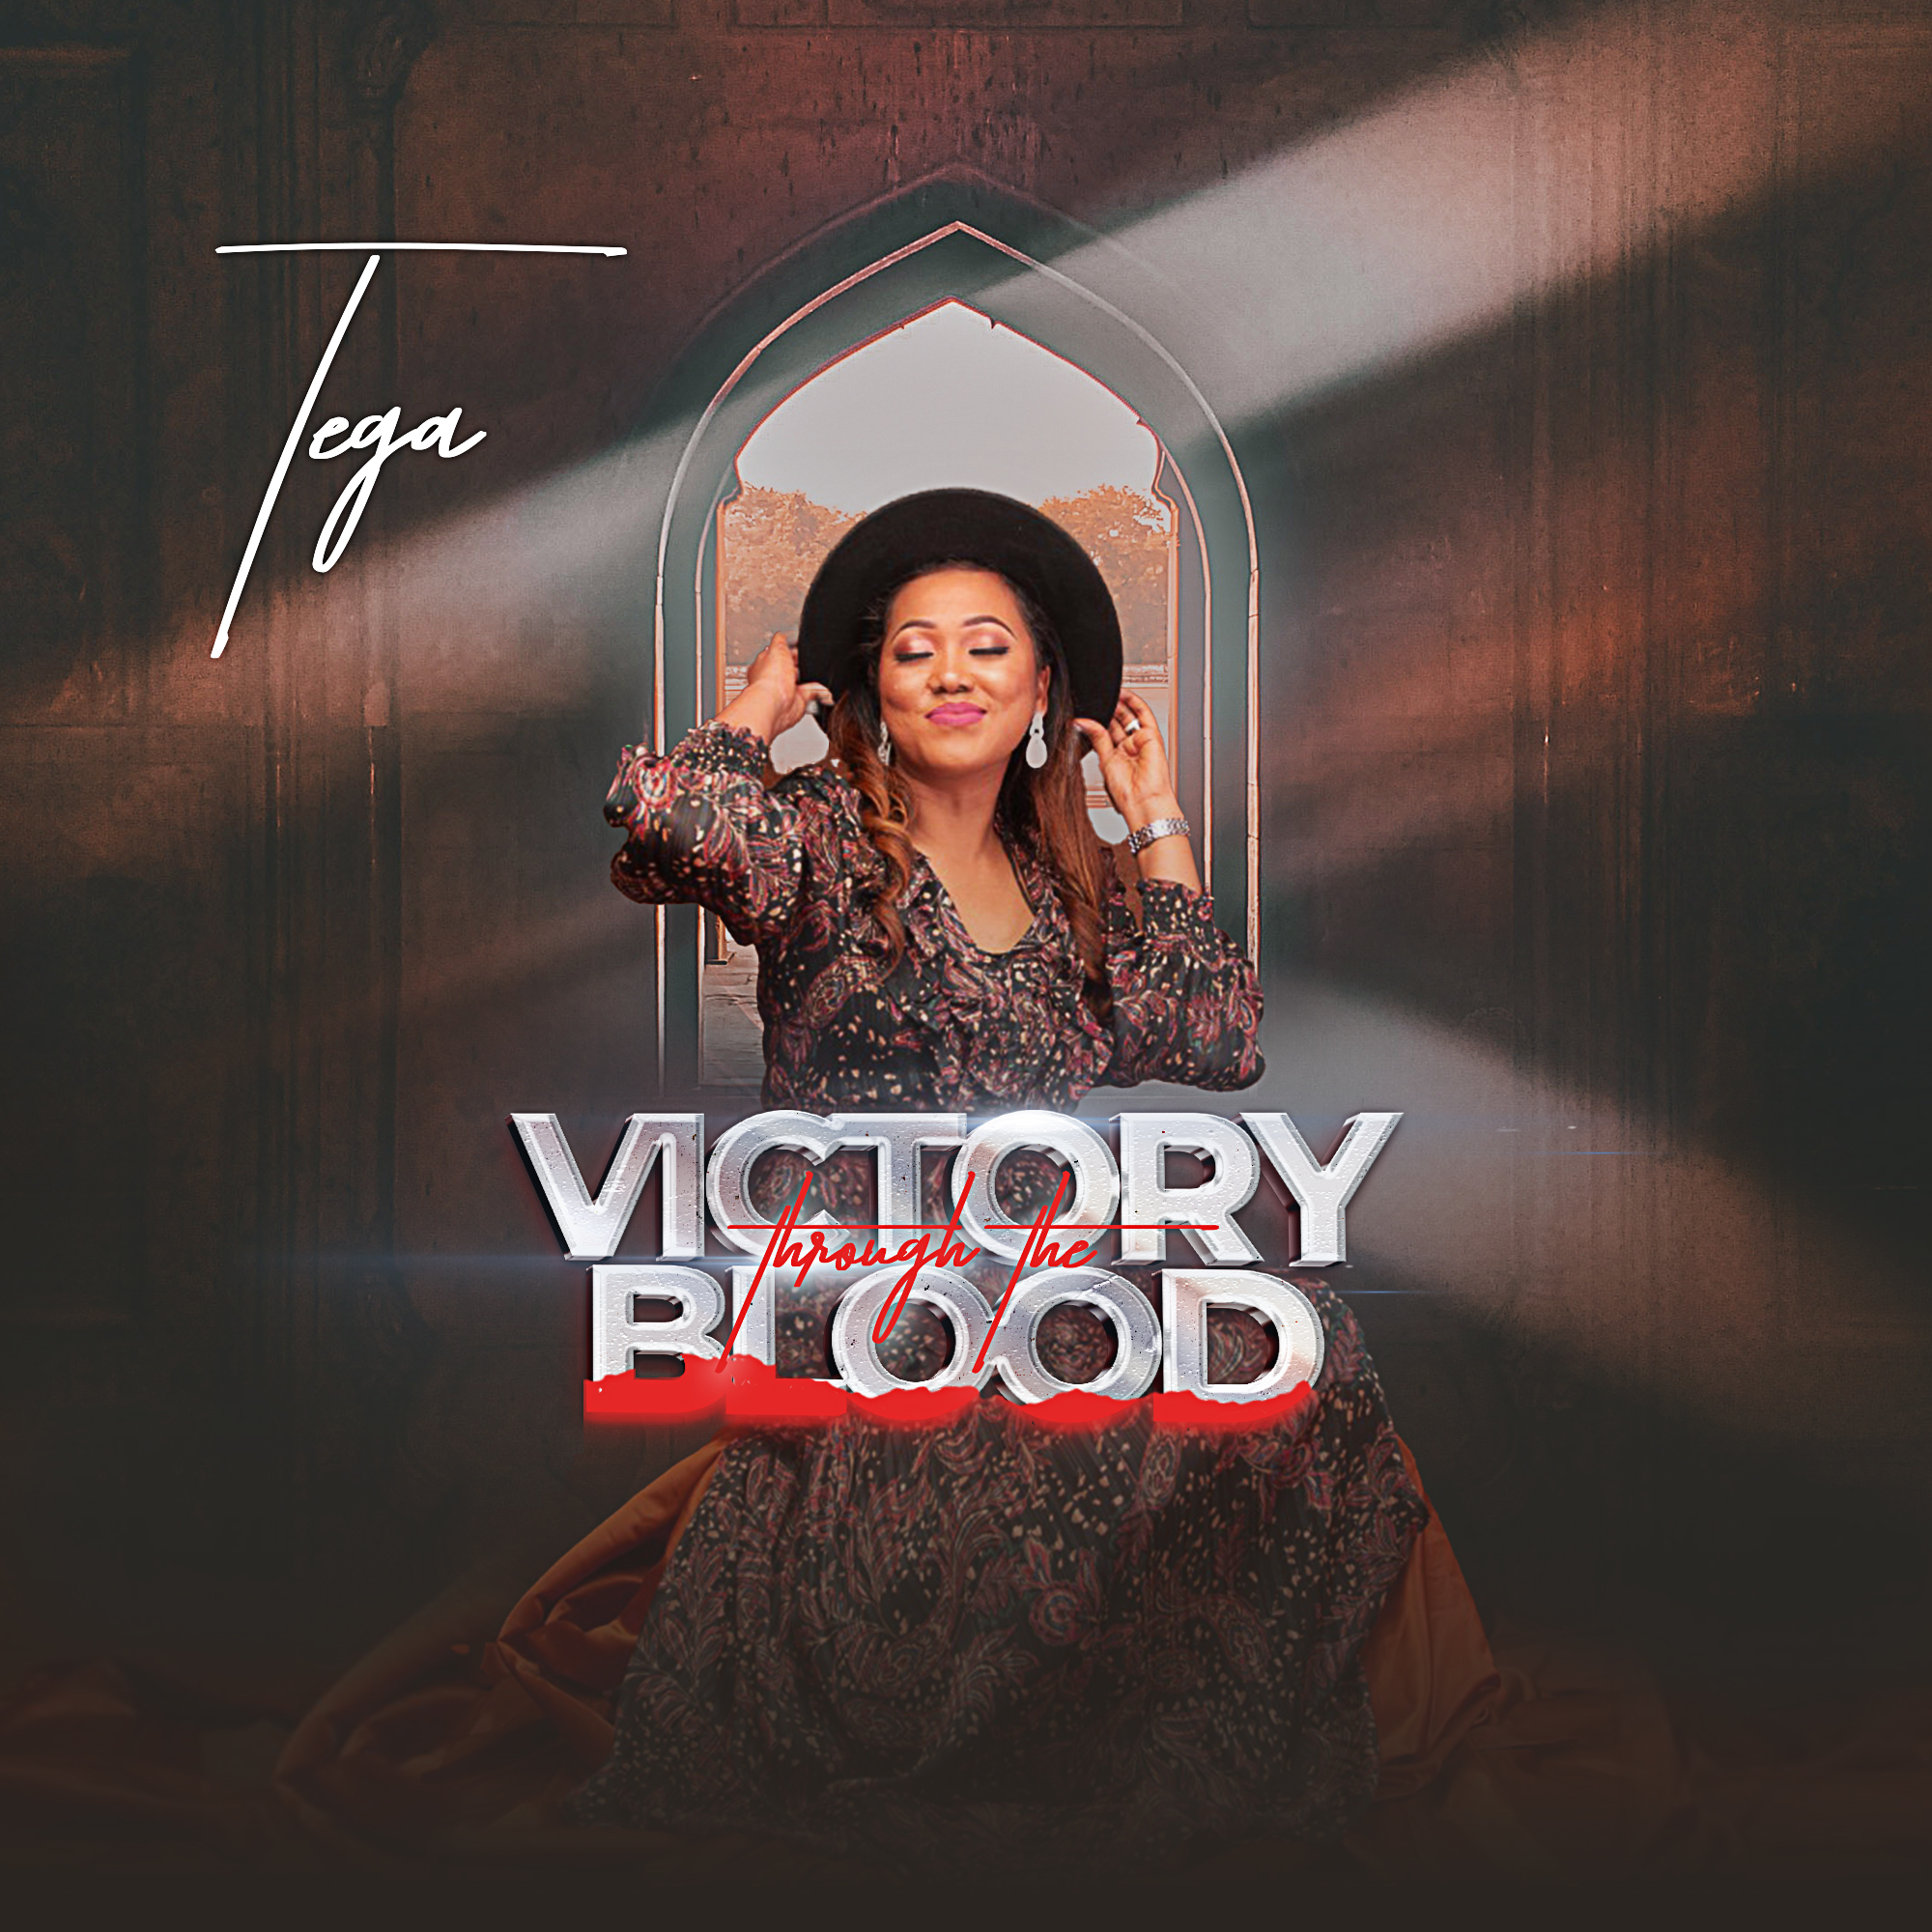 Download Mp3: Tega - Victory Through The Blood